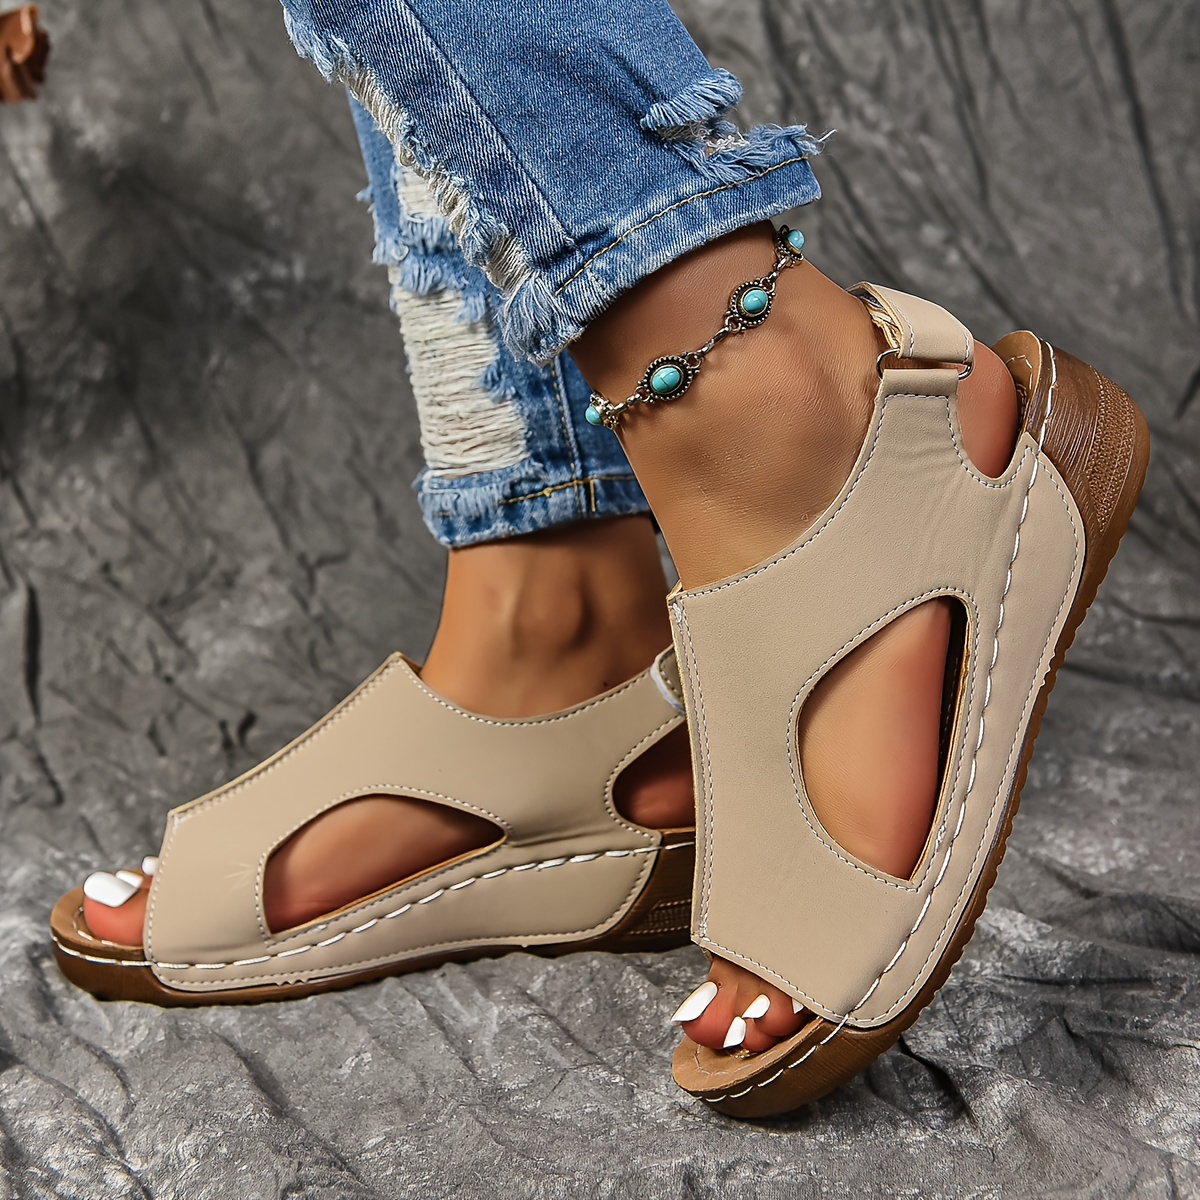 women s solid color wedge heeled sandals casual open toe details 19